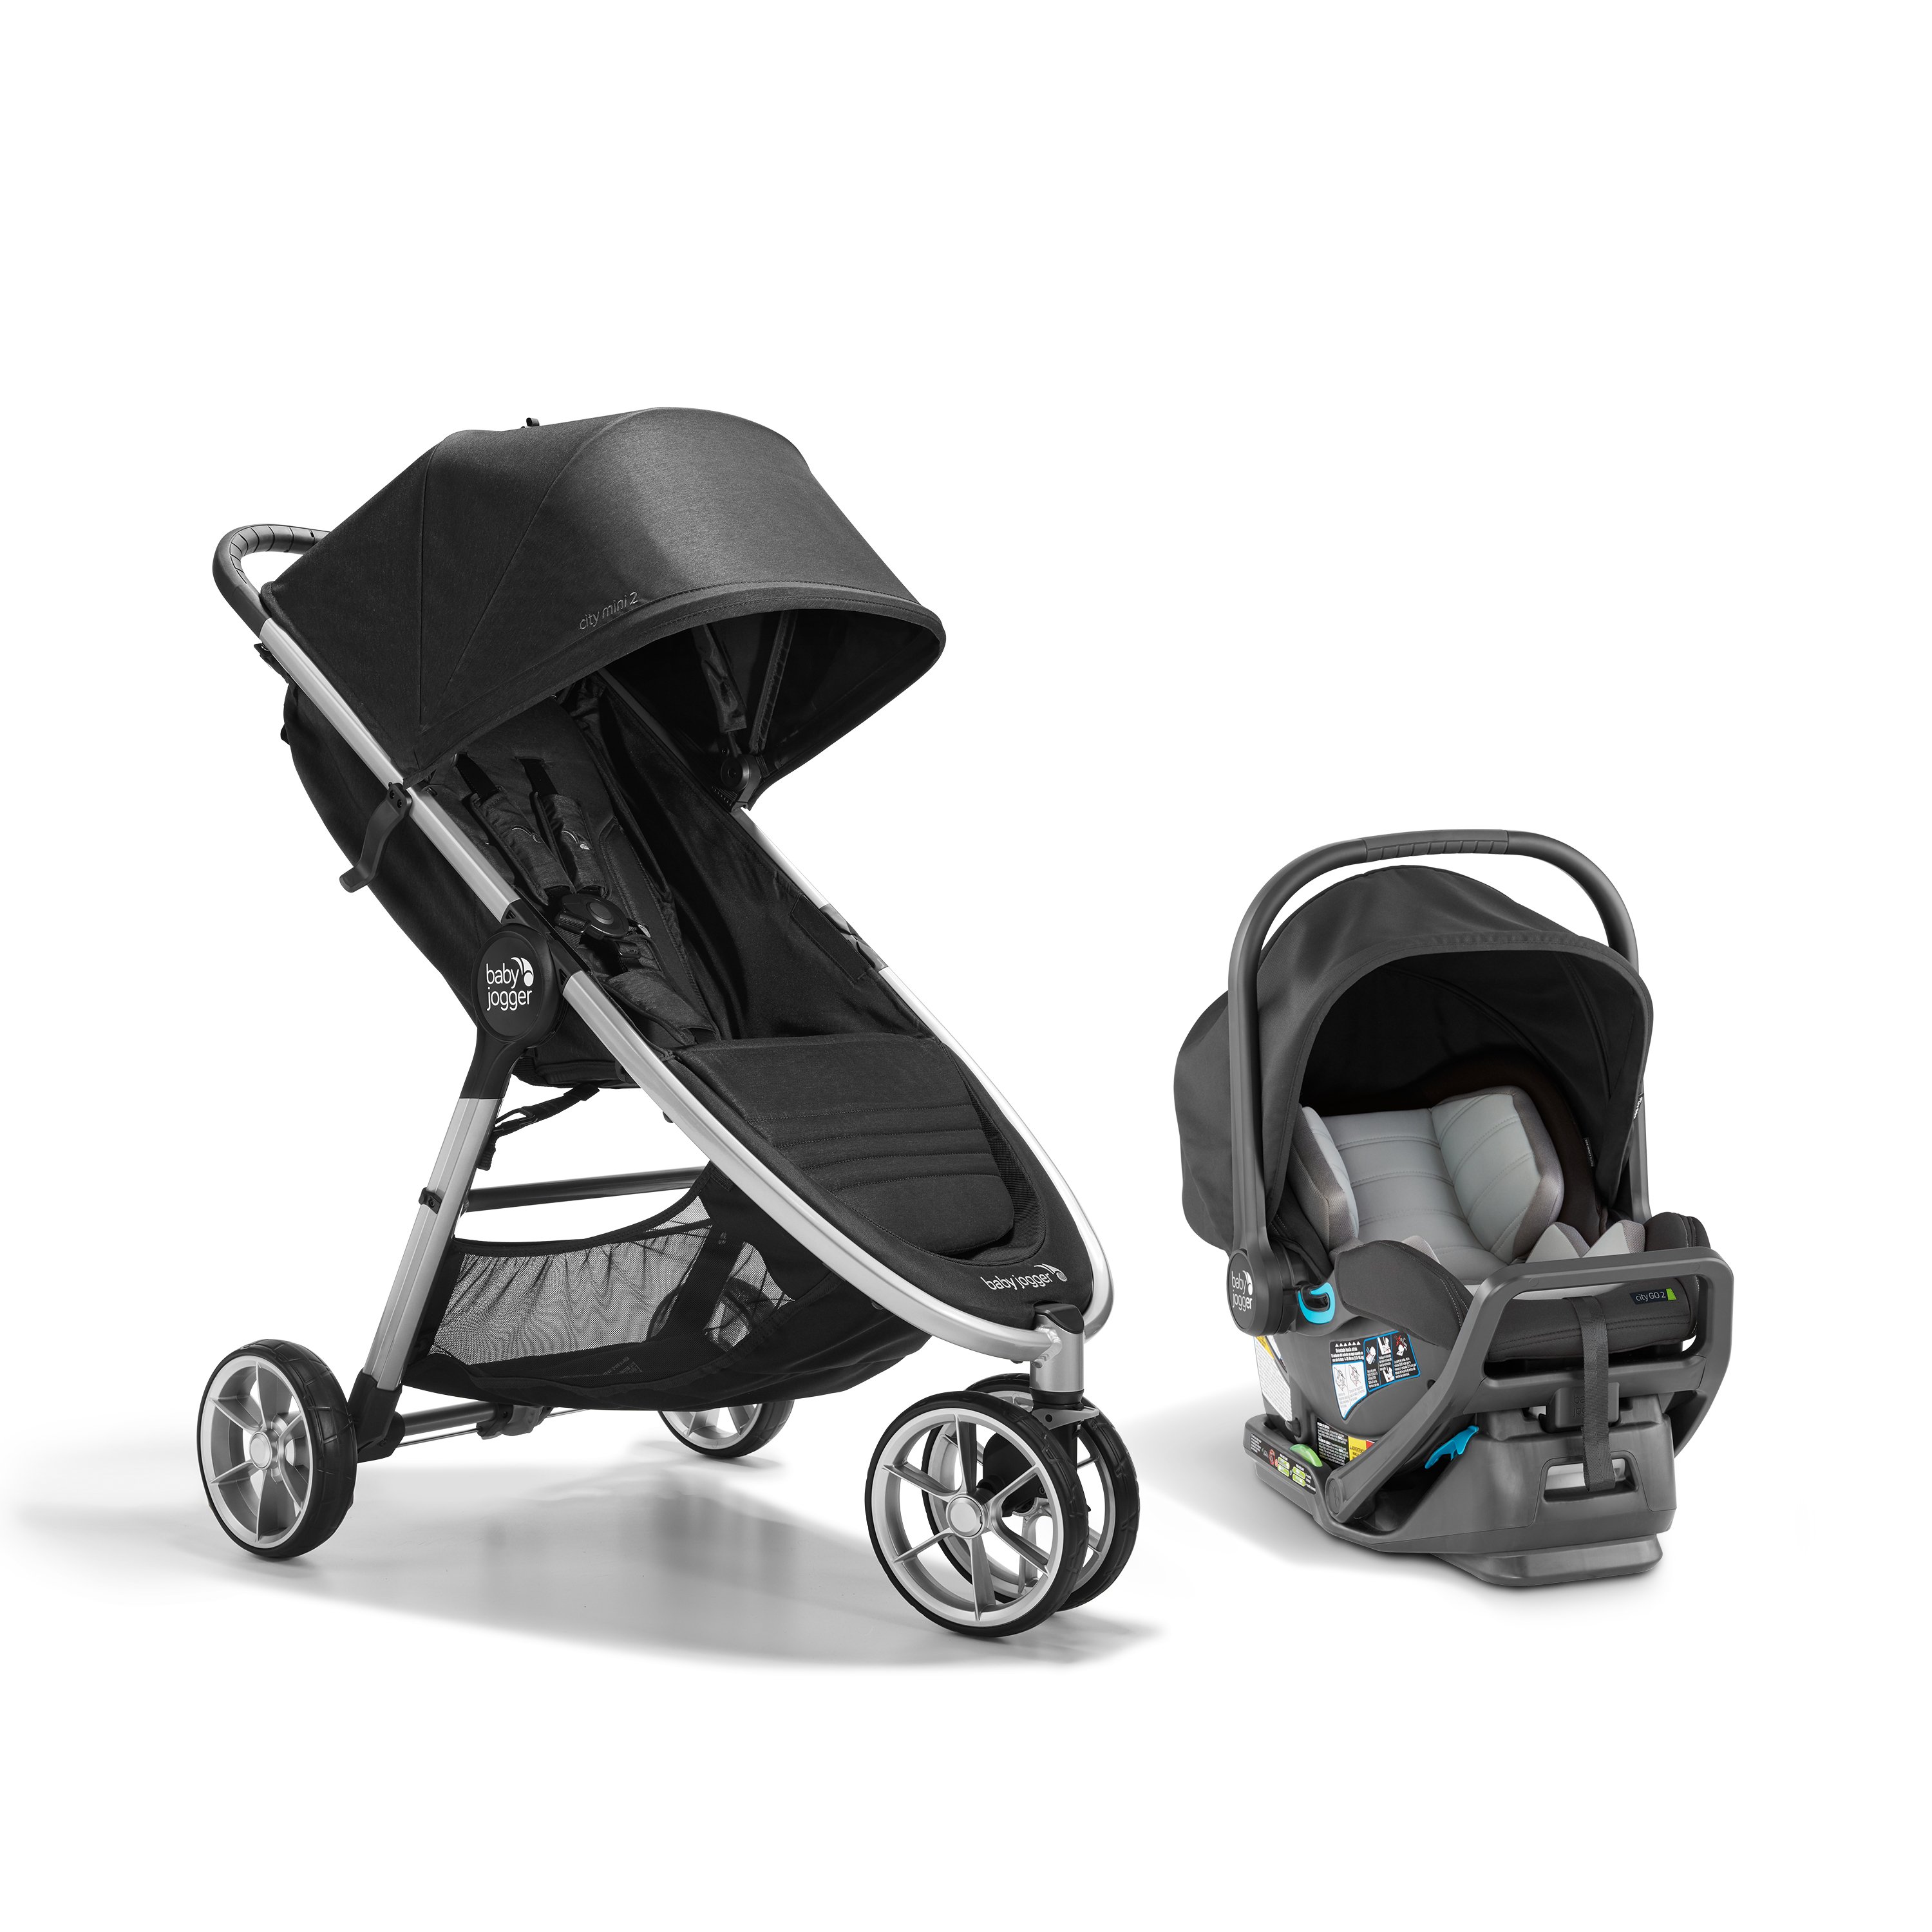 Baby Jogger City Mini Compact Lightweight 3-wheel Stroller NEW 6 COLOR CHOICES 